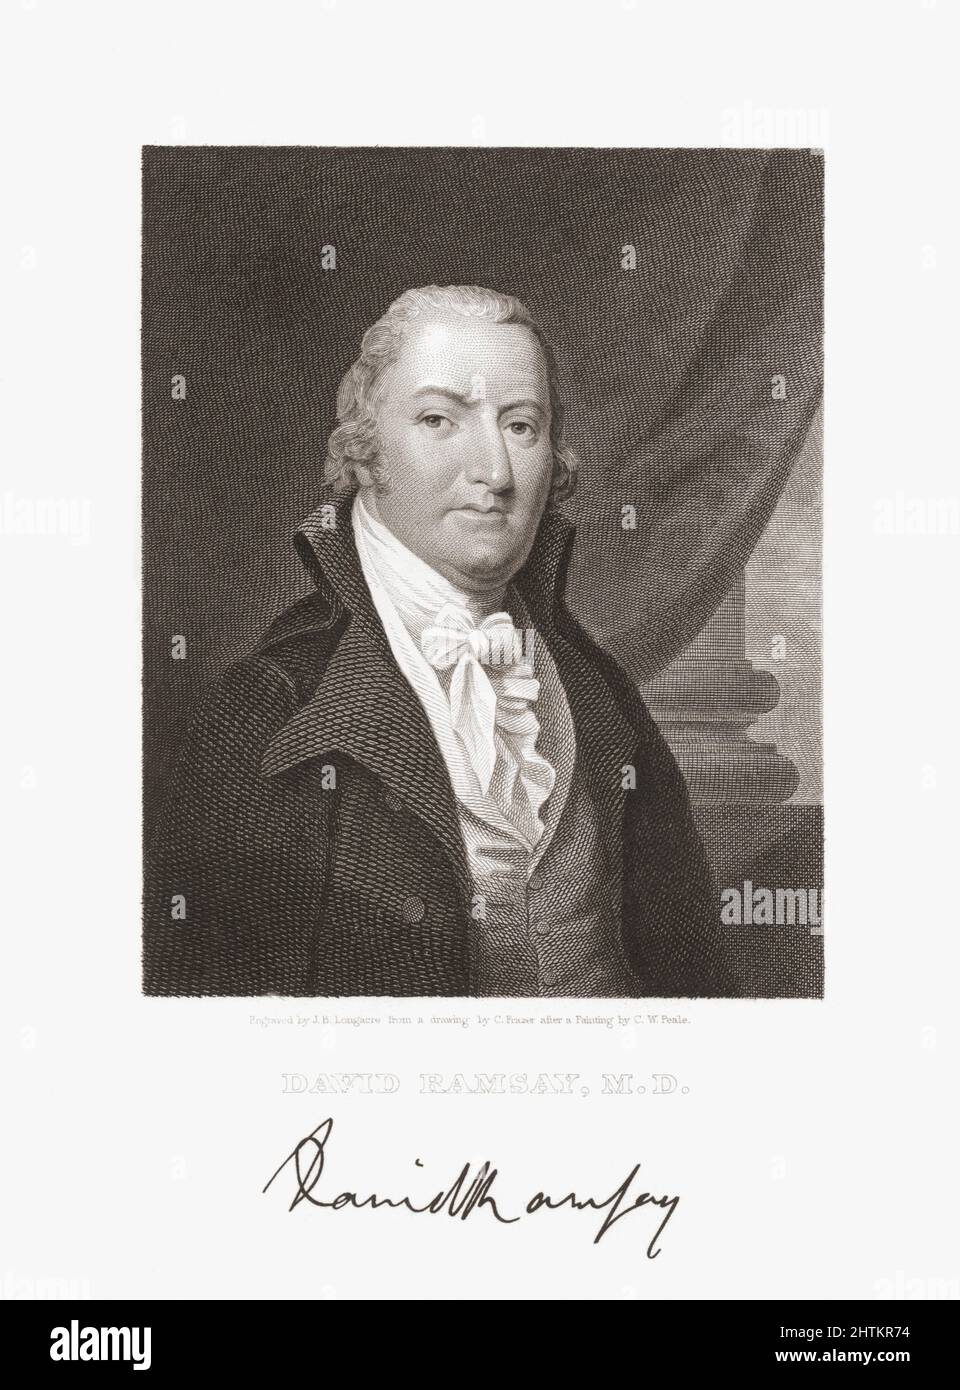 David Ramsay, 1749 - 1815.  American physician and acclaimed historian of the American Revoutionary War.  Ramsay was murdered by a mentally ill man he had examined for a court proceeding.  After an engraving by J.B. Longacre from a drawing by C. Frazer after a painting by C.W. Peale. Stock Photo